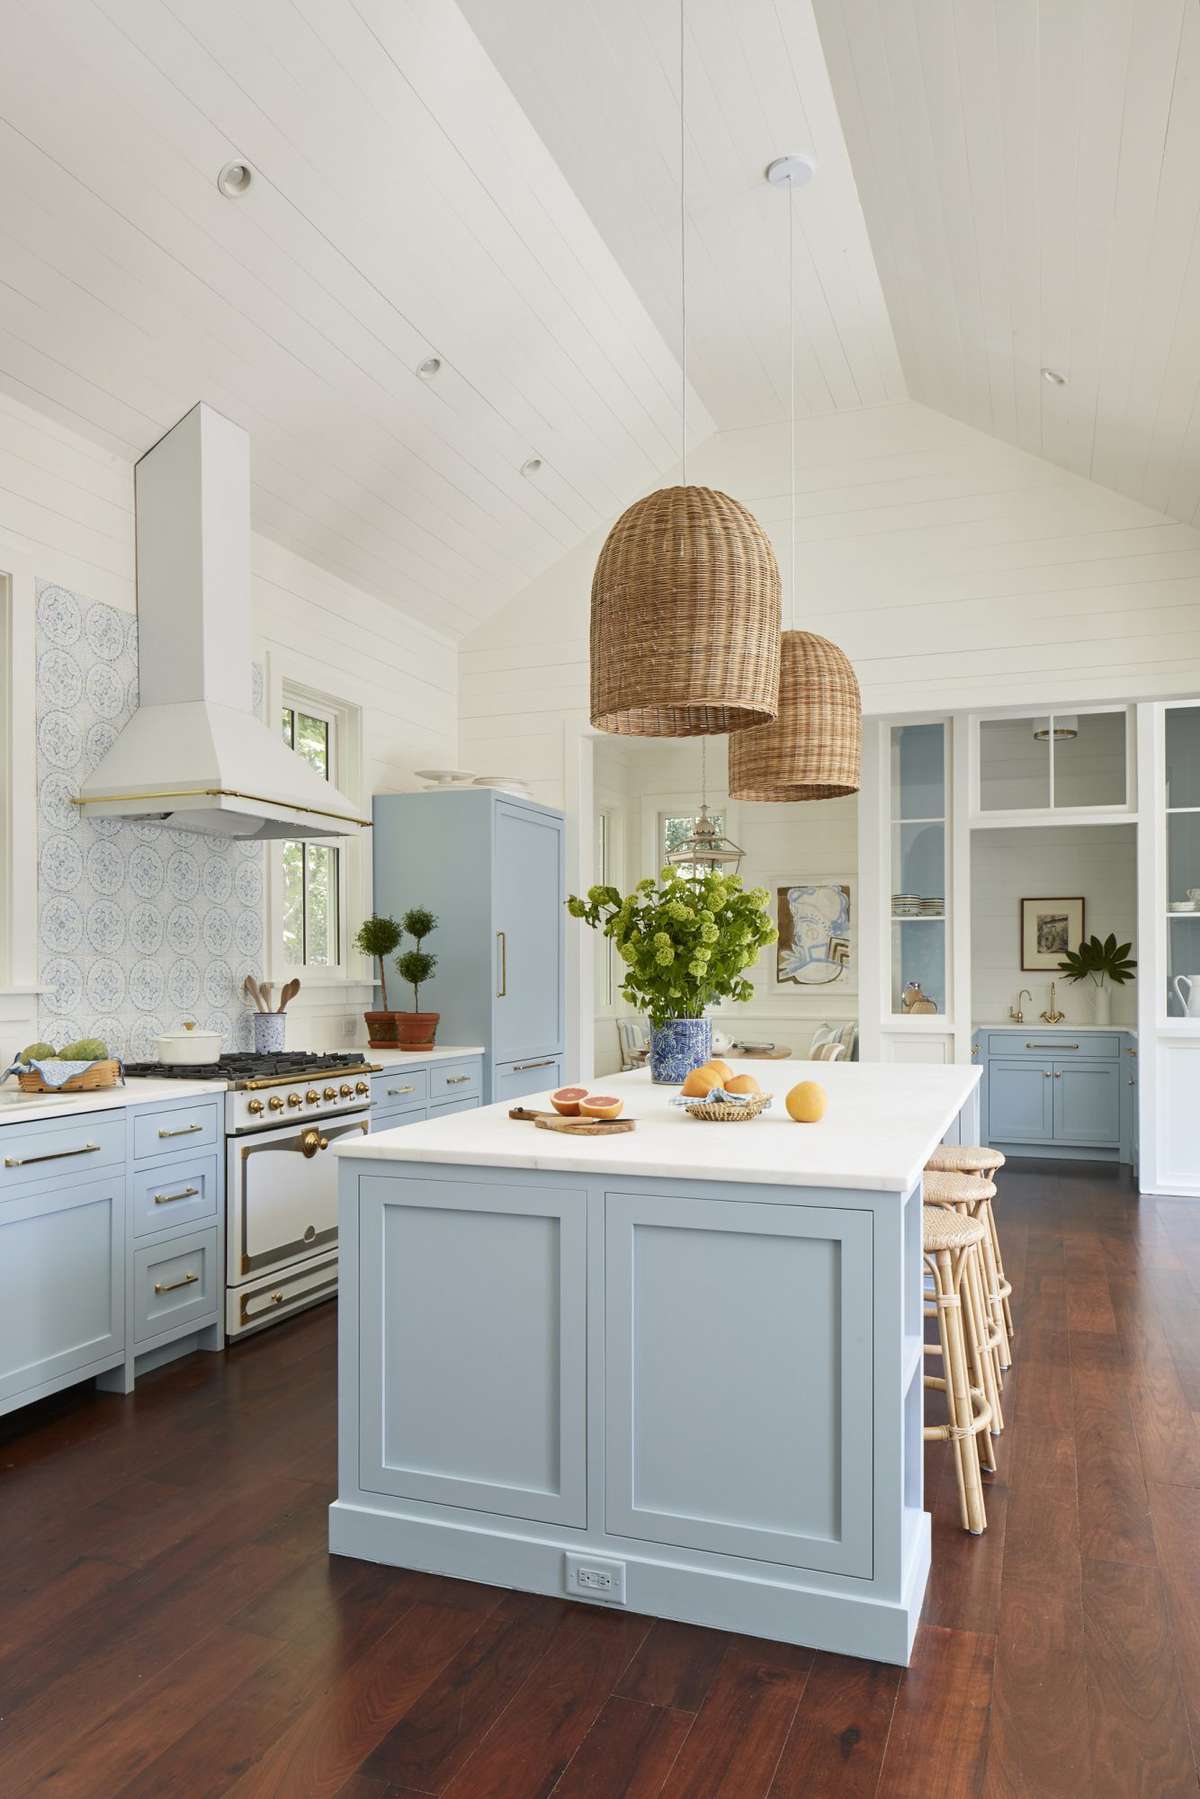 88 Beautiful Kitchens to Plan Your Dream Space | Southern Living